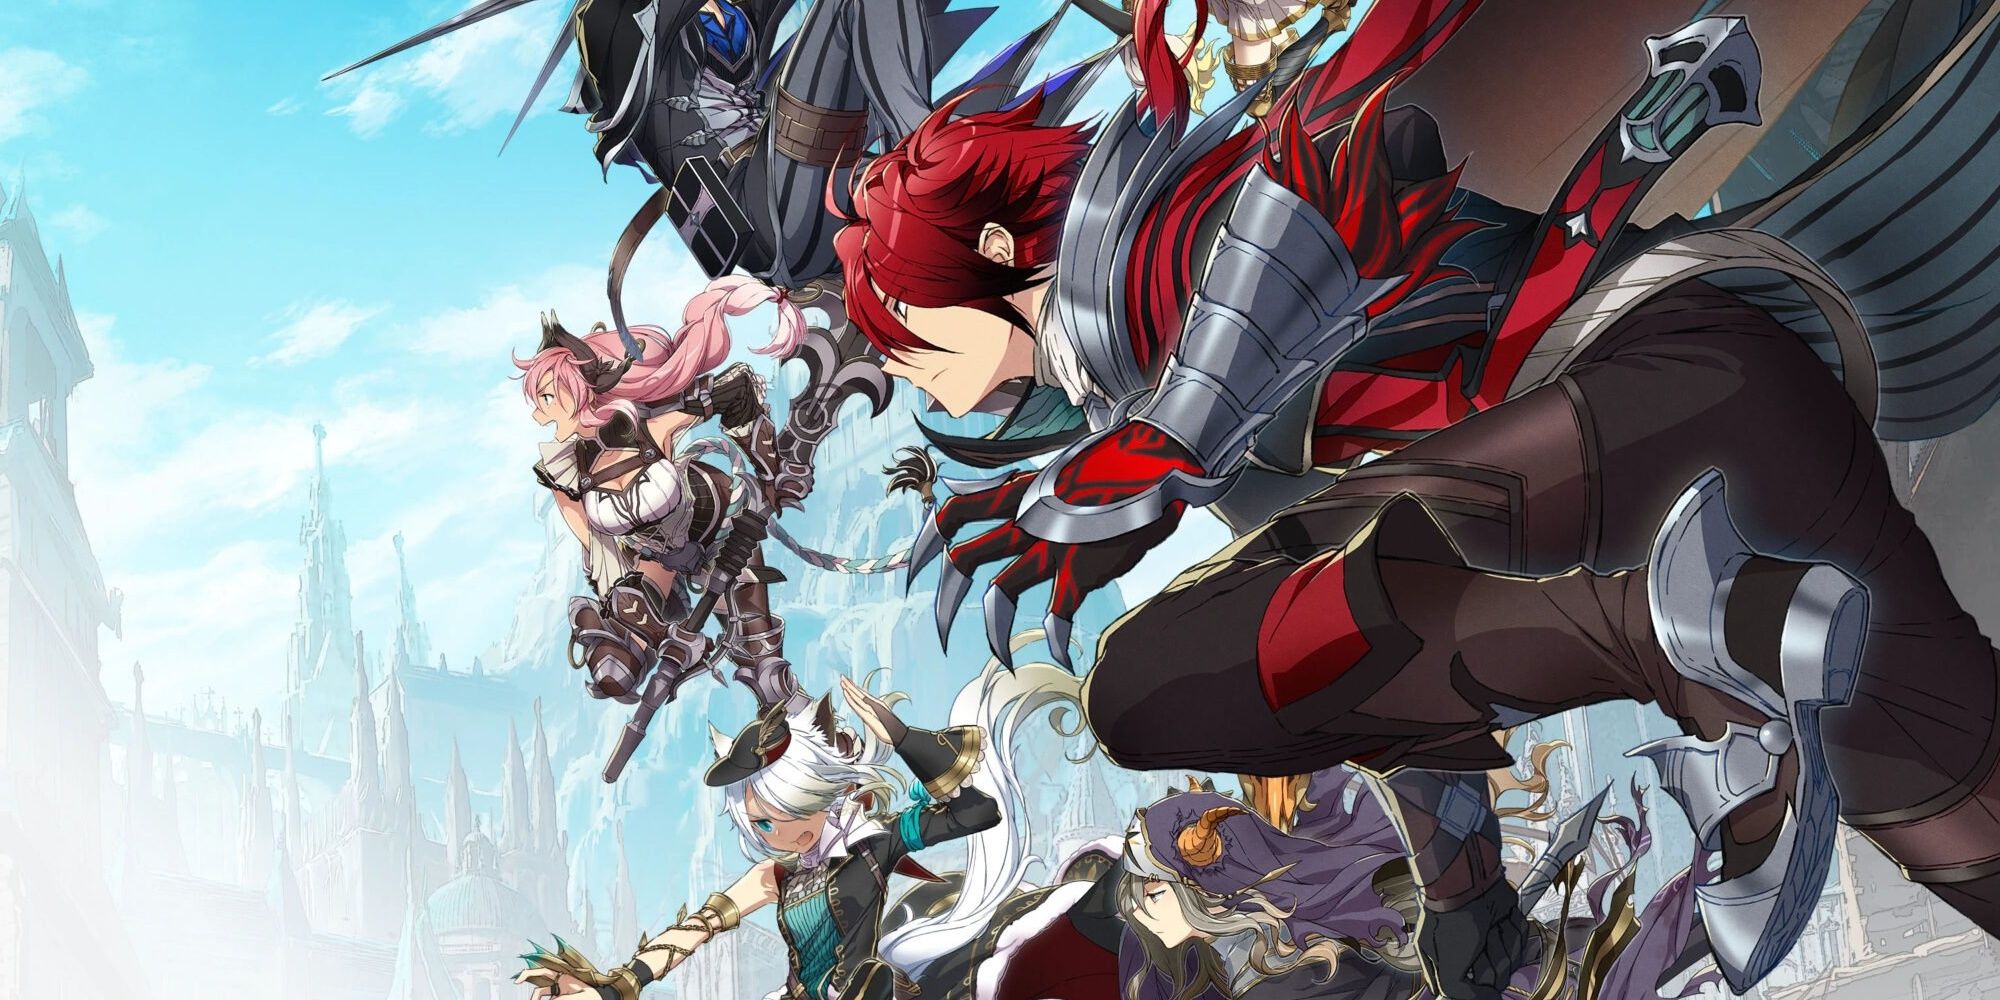 Adol and the cast of Ys IX Monstrum Nox, all plunging into battle.